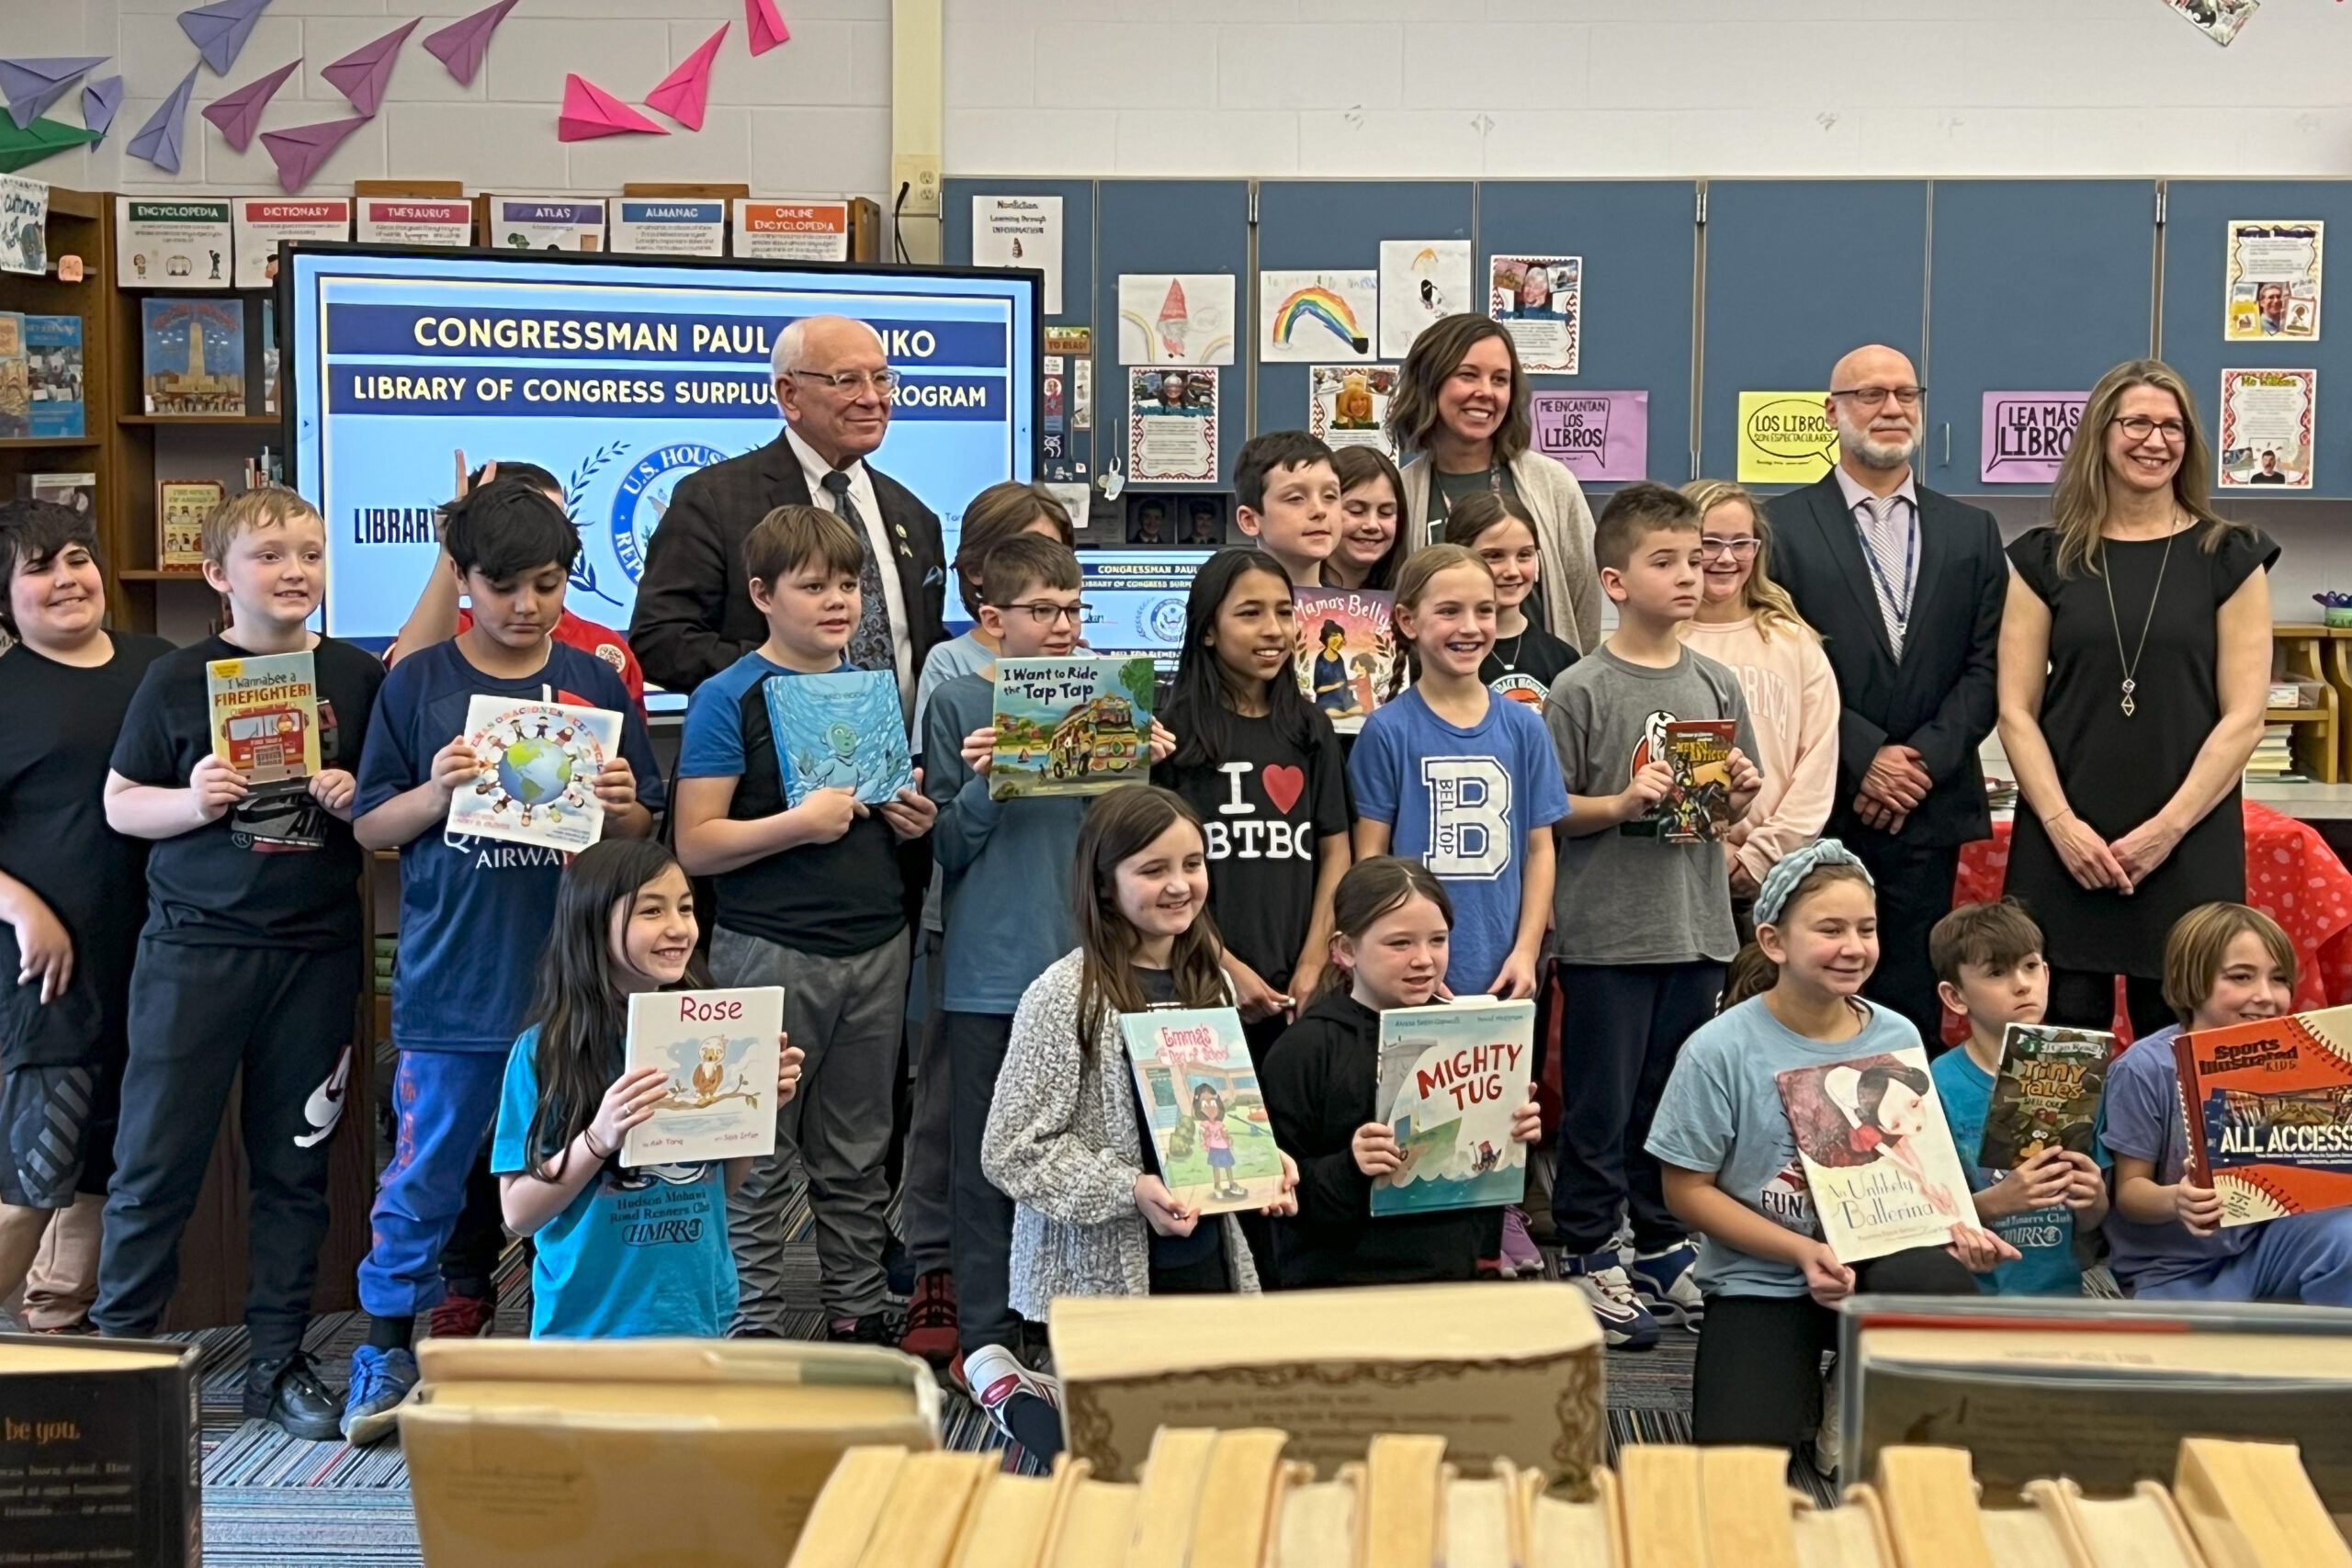 Congressman Paul Tonko visited Bell Top Elementary School on Monday morning to deliver a book donation from the Library of Congress.